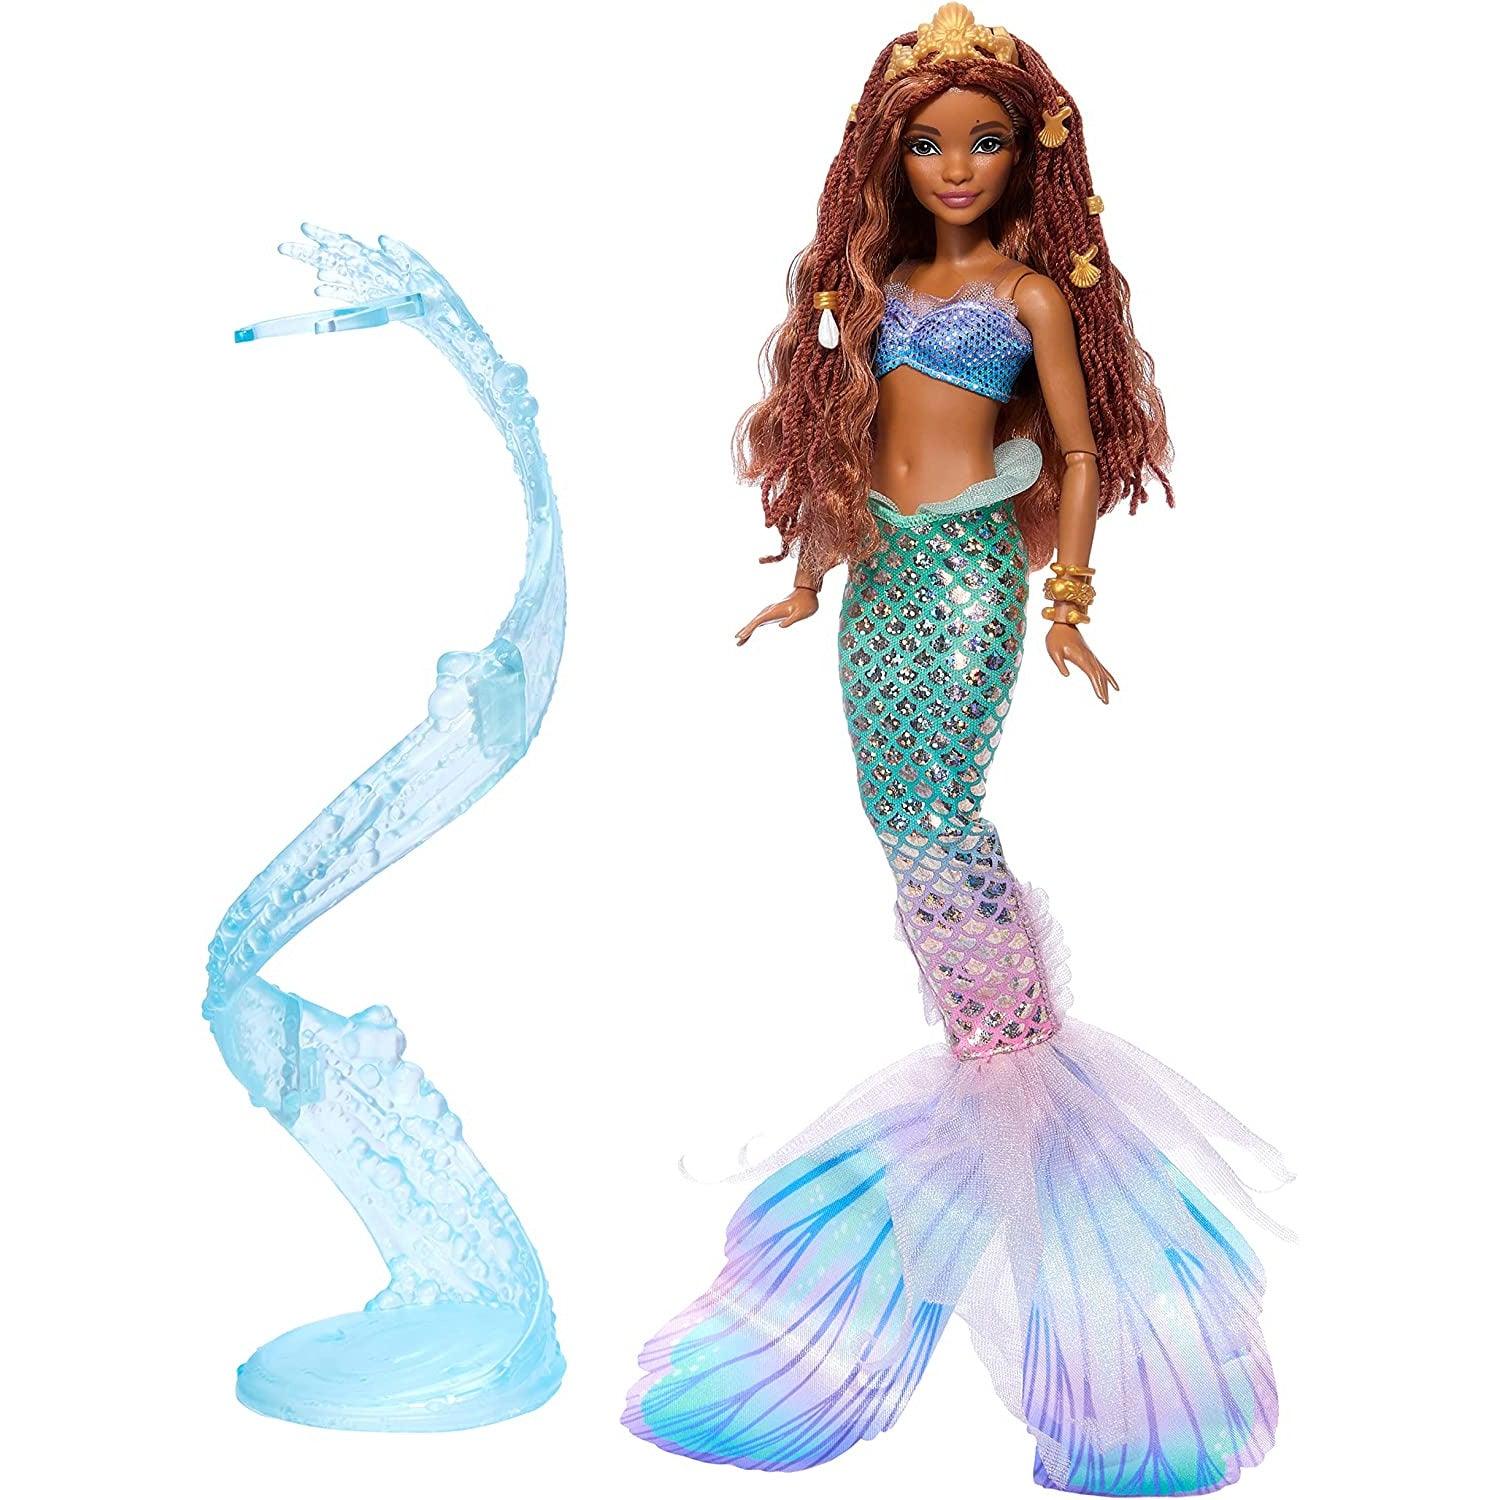 Mattel Disney The Little Mermaid Deluxe Mermaid Ariel Doll with Iridescent Tail, Hair Jewelry Beads, and Doll Stand